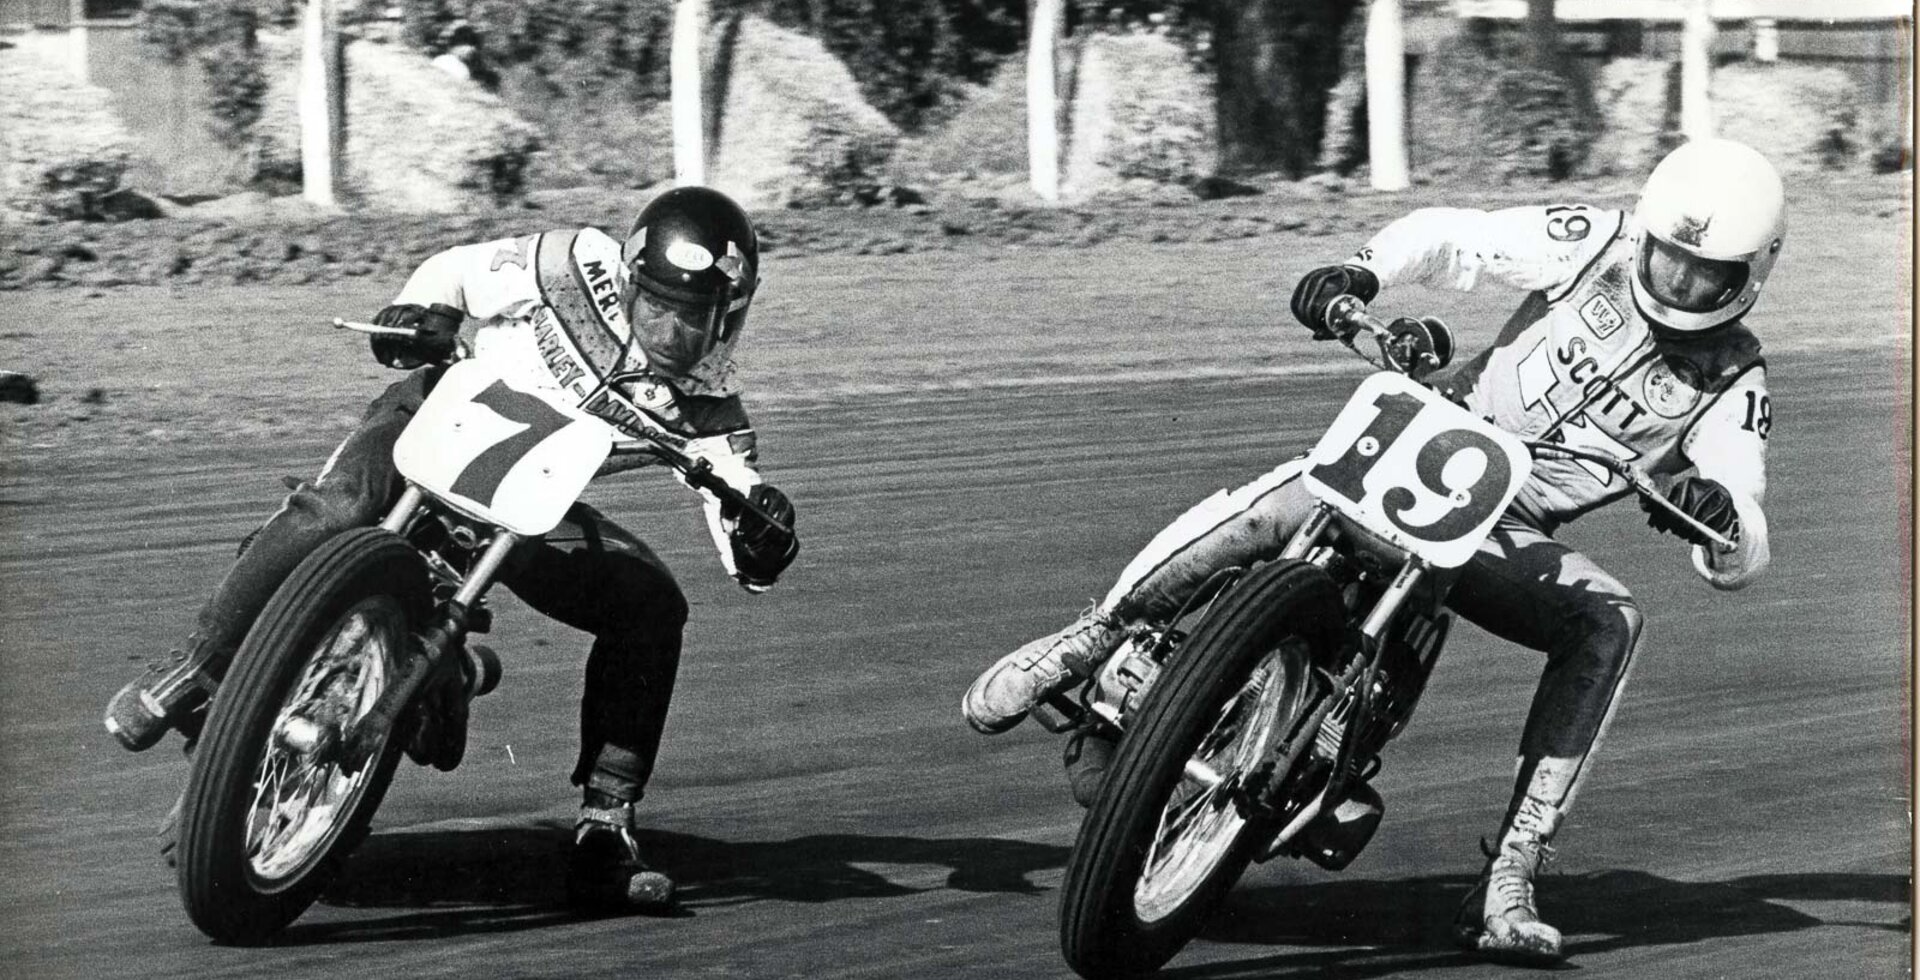 Mert Lawwill (left) doing what he does best: keeping the throttle wide open and the bike sideways. In his 15-year racing career, he stacked up 161 AMA Grand National finishes, including 15 wins. Photo courtesy of the American Motorcyclist Association